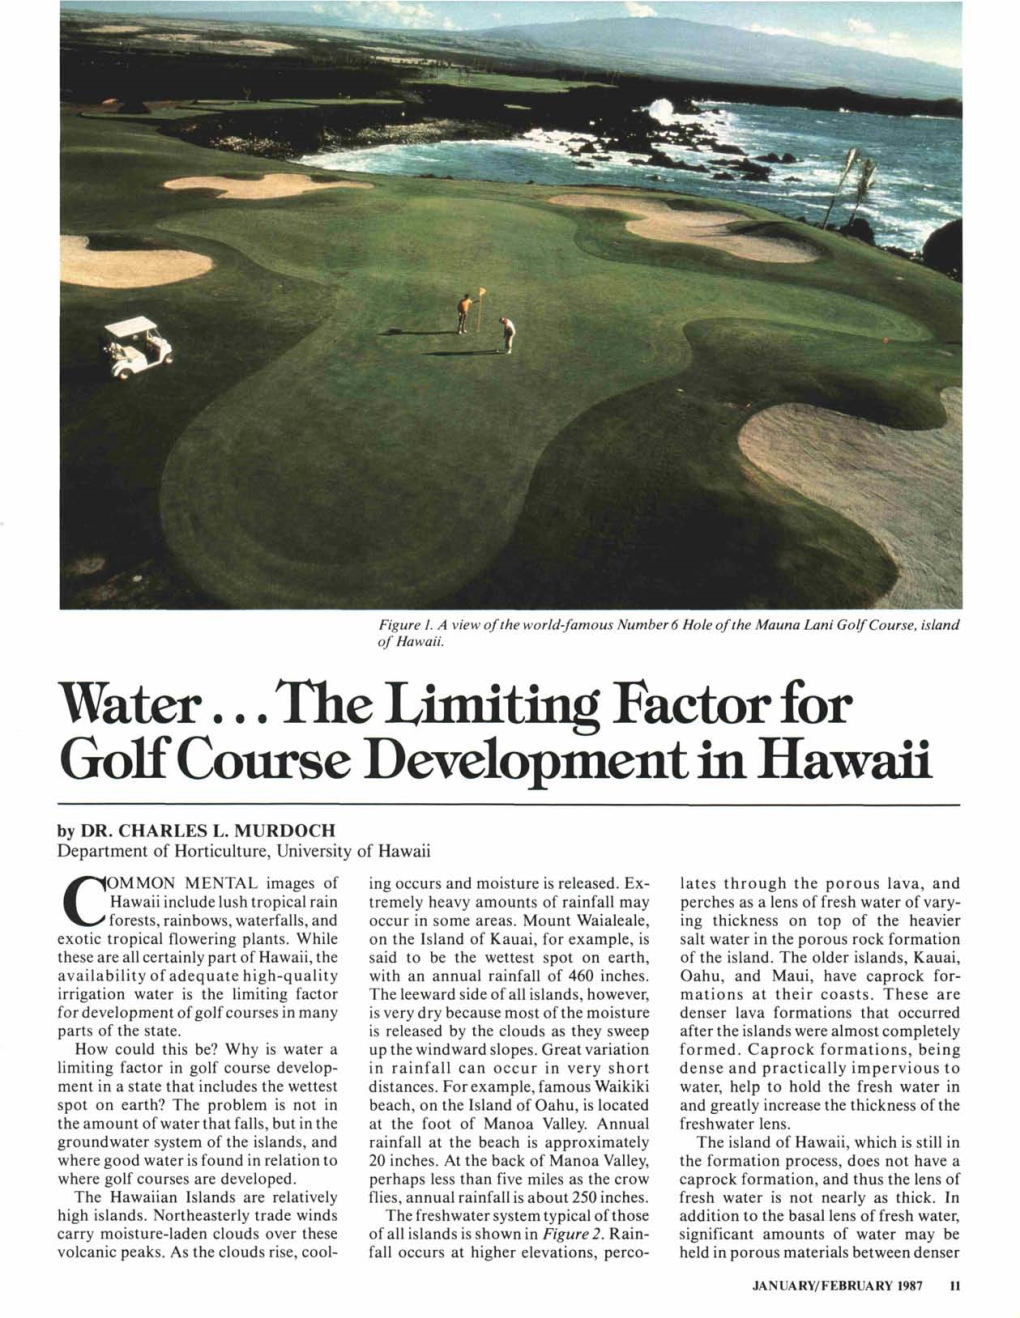 Water ... the Limiting Factor for Golf Course Development in Hawaii by DR